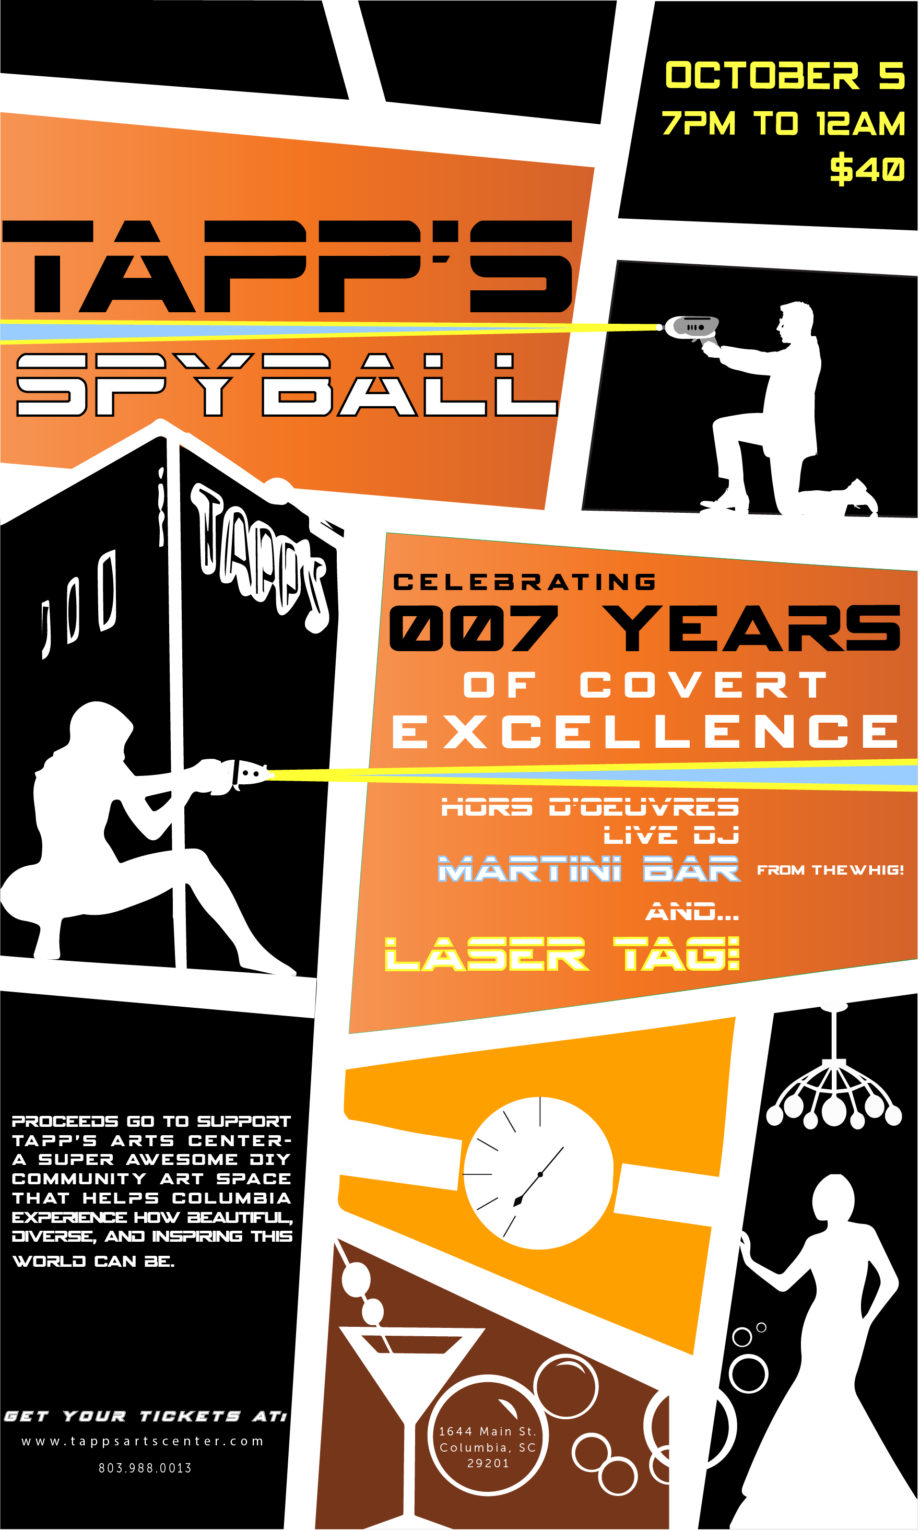 https://squareup.com/store/friends-of-the-tapps-arts-center/item/tapp-s-spyball-celebrating-years-of-covert-excellence